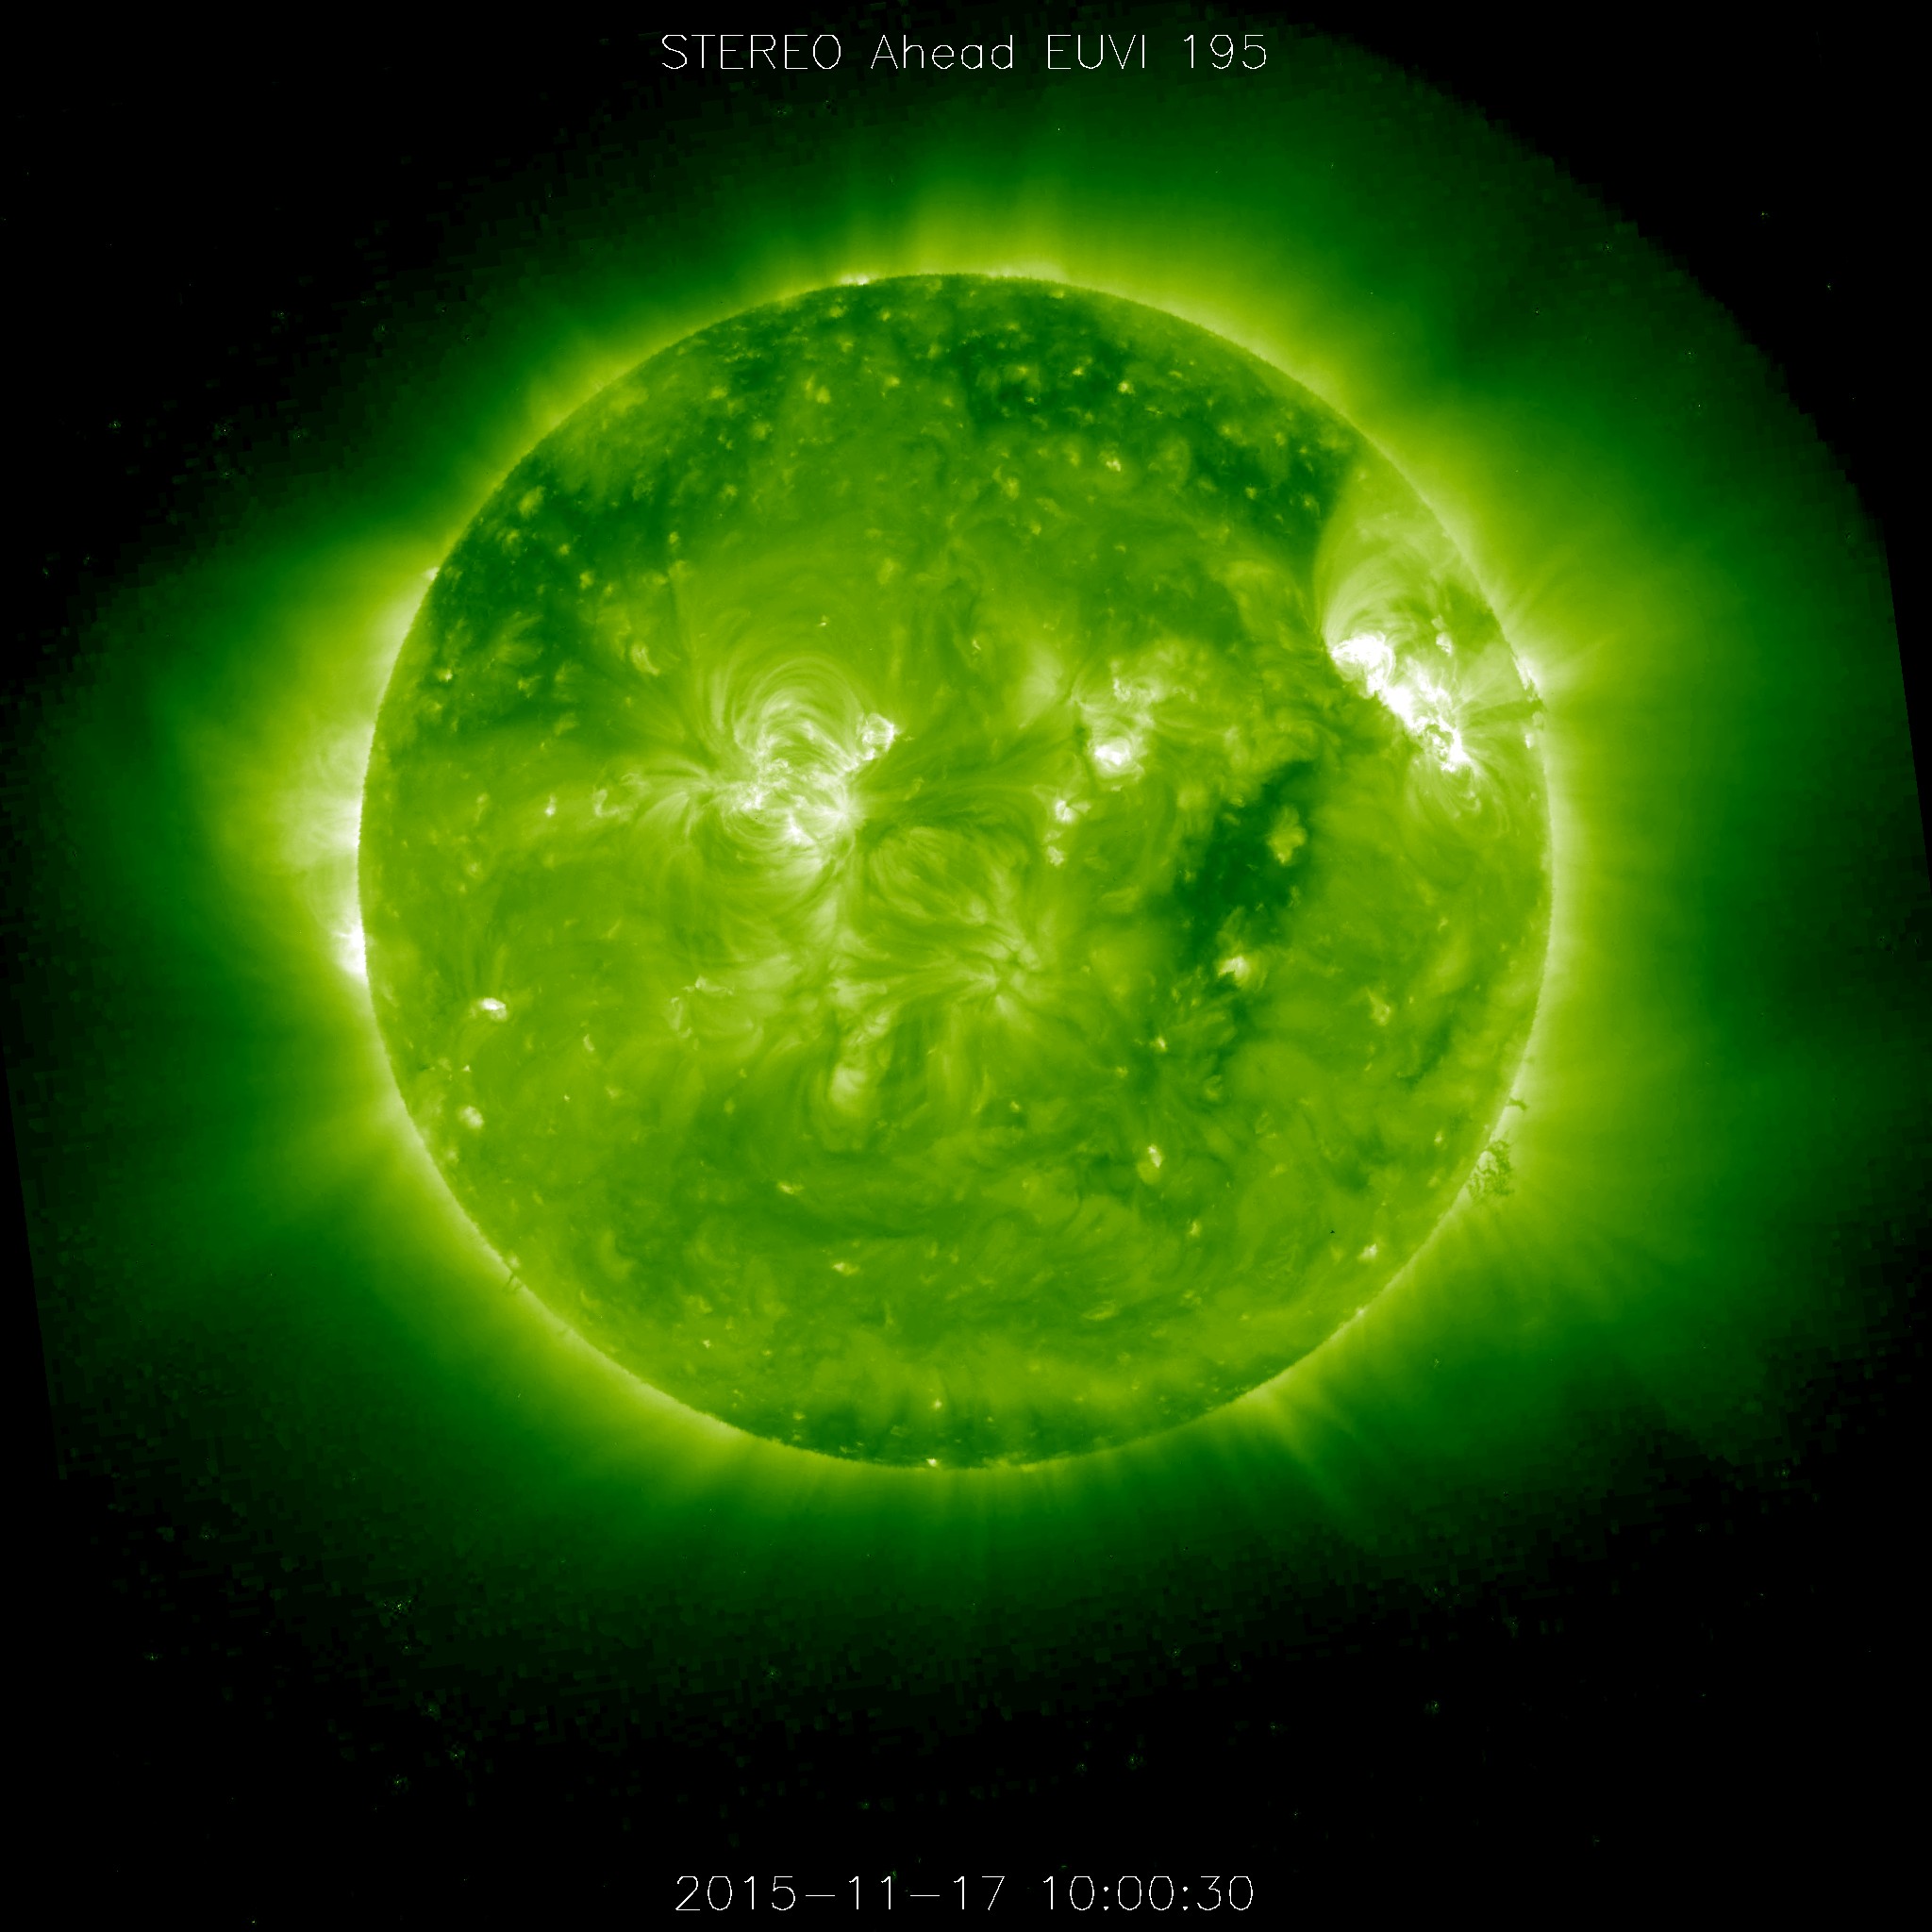 image of the sun taken with the Extreme Ultraviolet Imager aboard STEREO-A